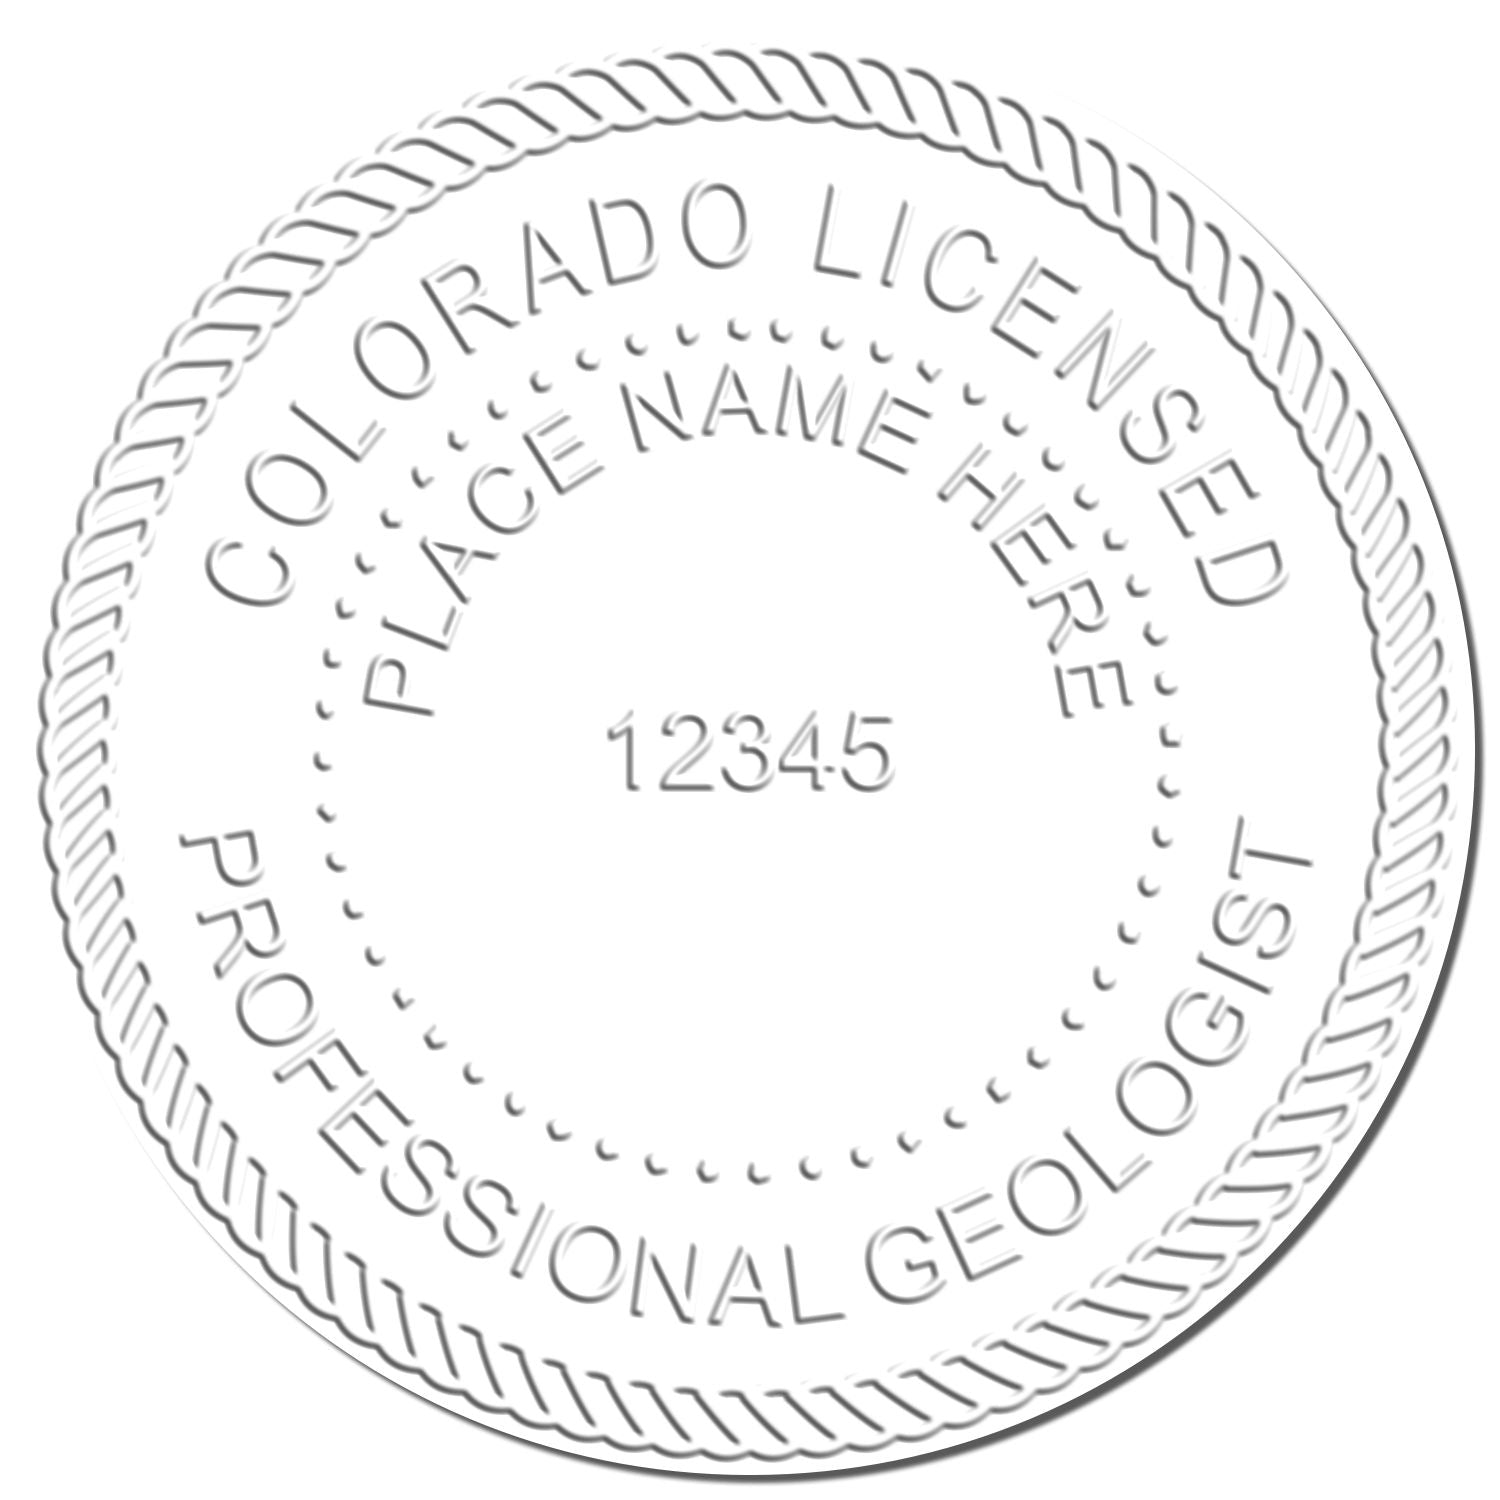 The main image for the Colorado Geologist Desk Seal depicting a sample of the imprint and imprint sample